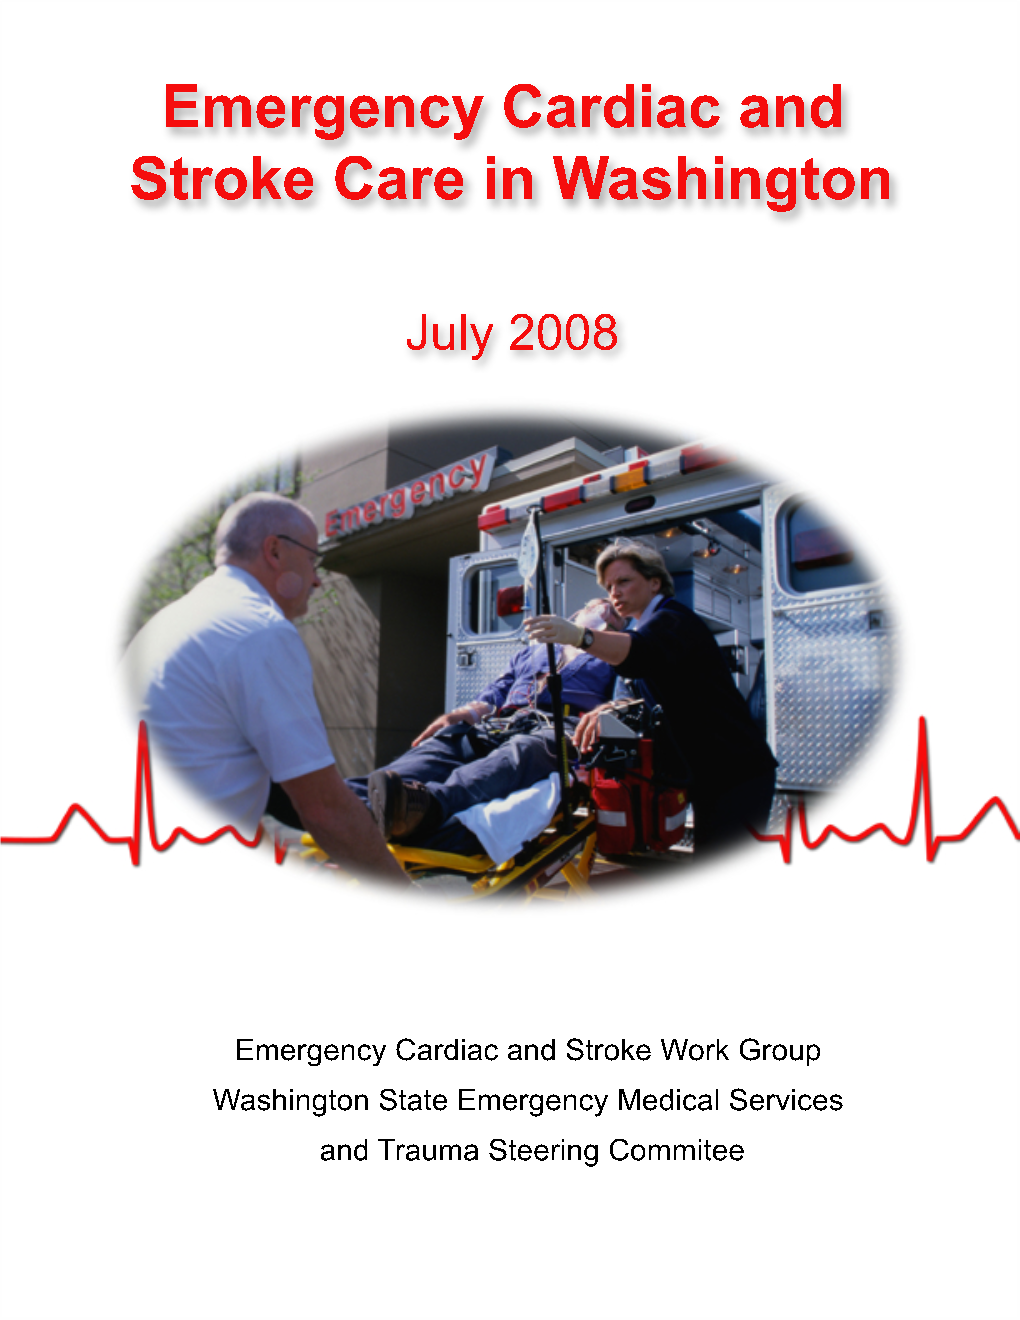 The State of Emergency Cardiac and Stroke Care in Washington